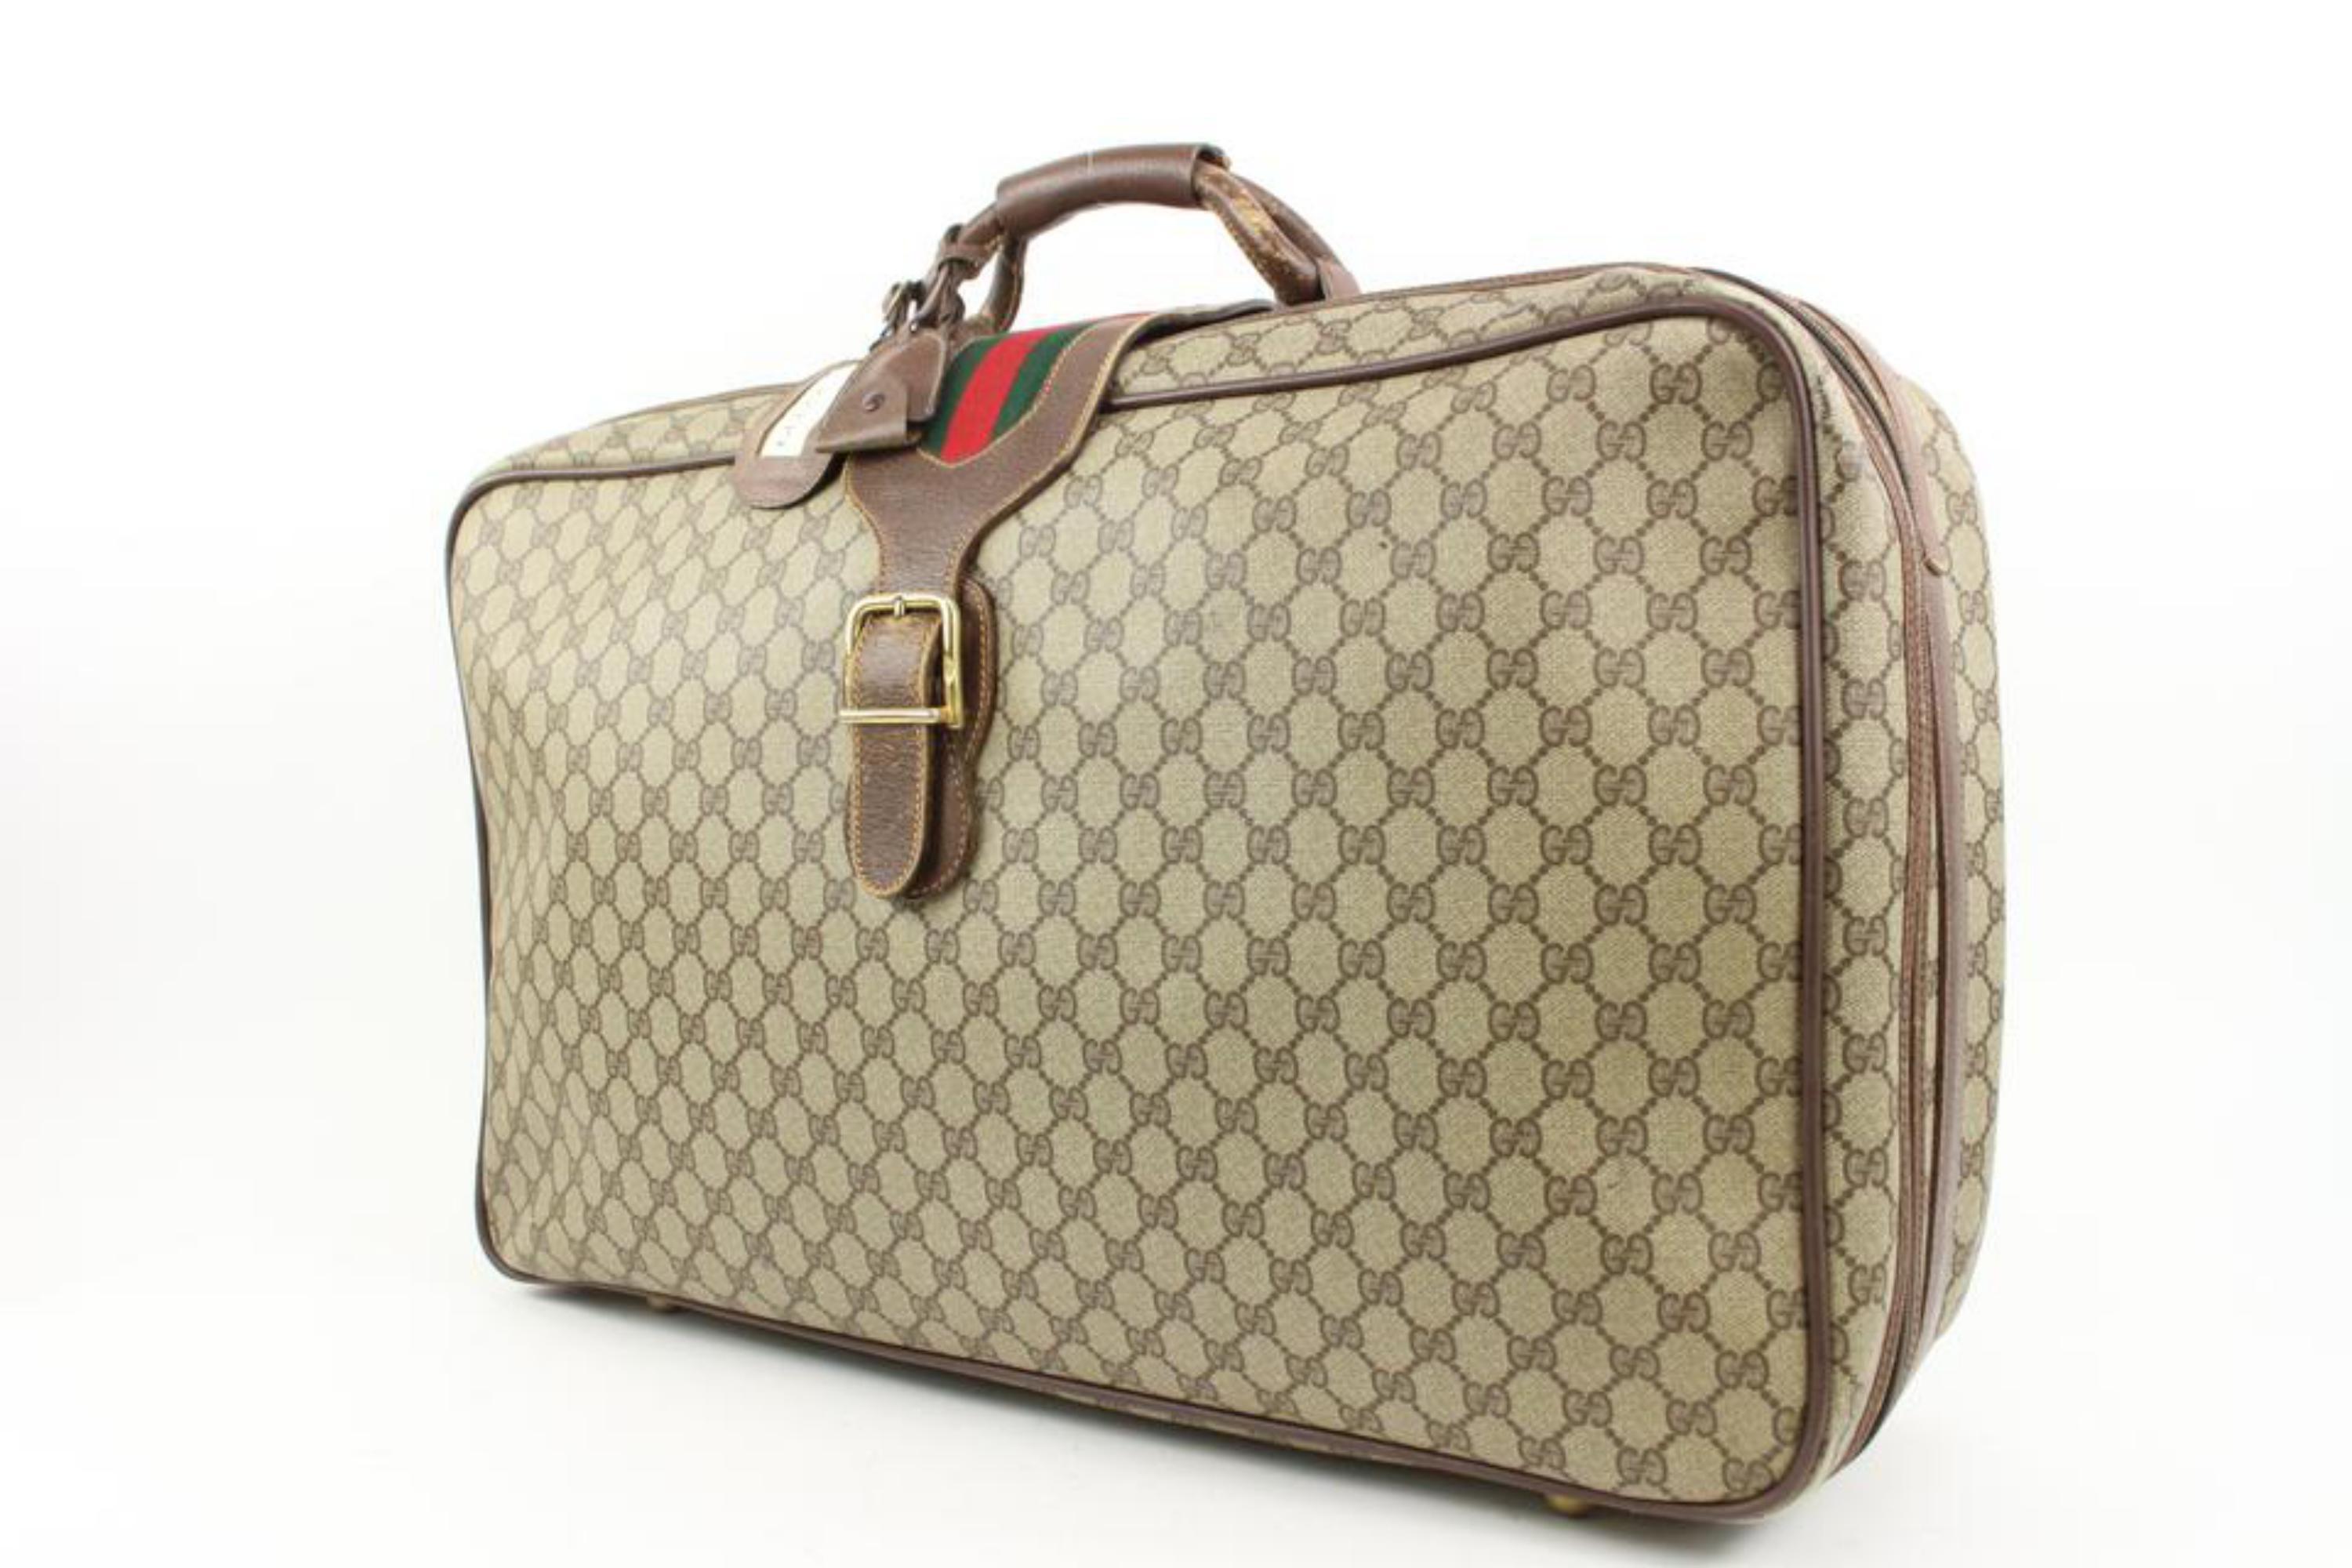 Gucci XL Supreme GG Web Suitcase Soft Trunk Luggage s210g66
Date Code/Serial Number: 21-19-009
Made In: Italy
Measurements: Length:  23